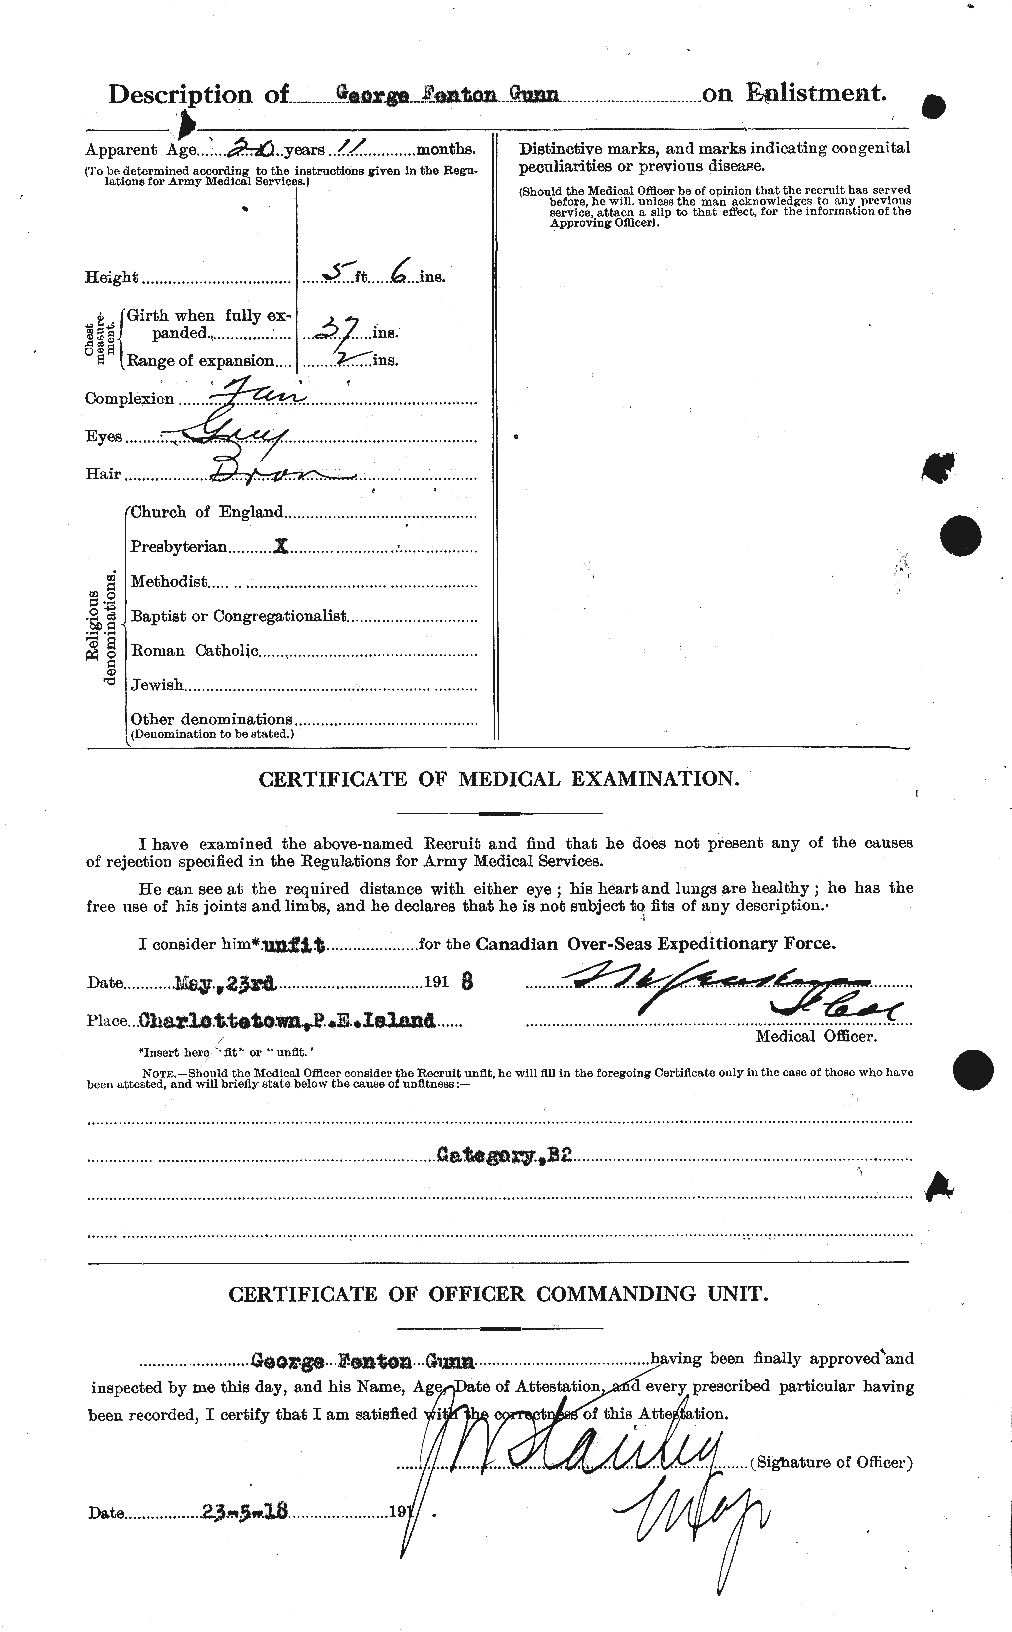 Personnel Records of the First World War - CEF 369241b